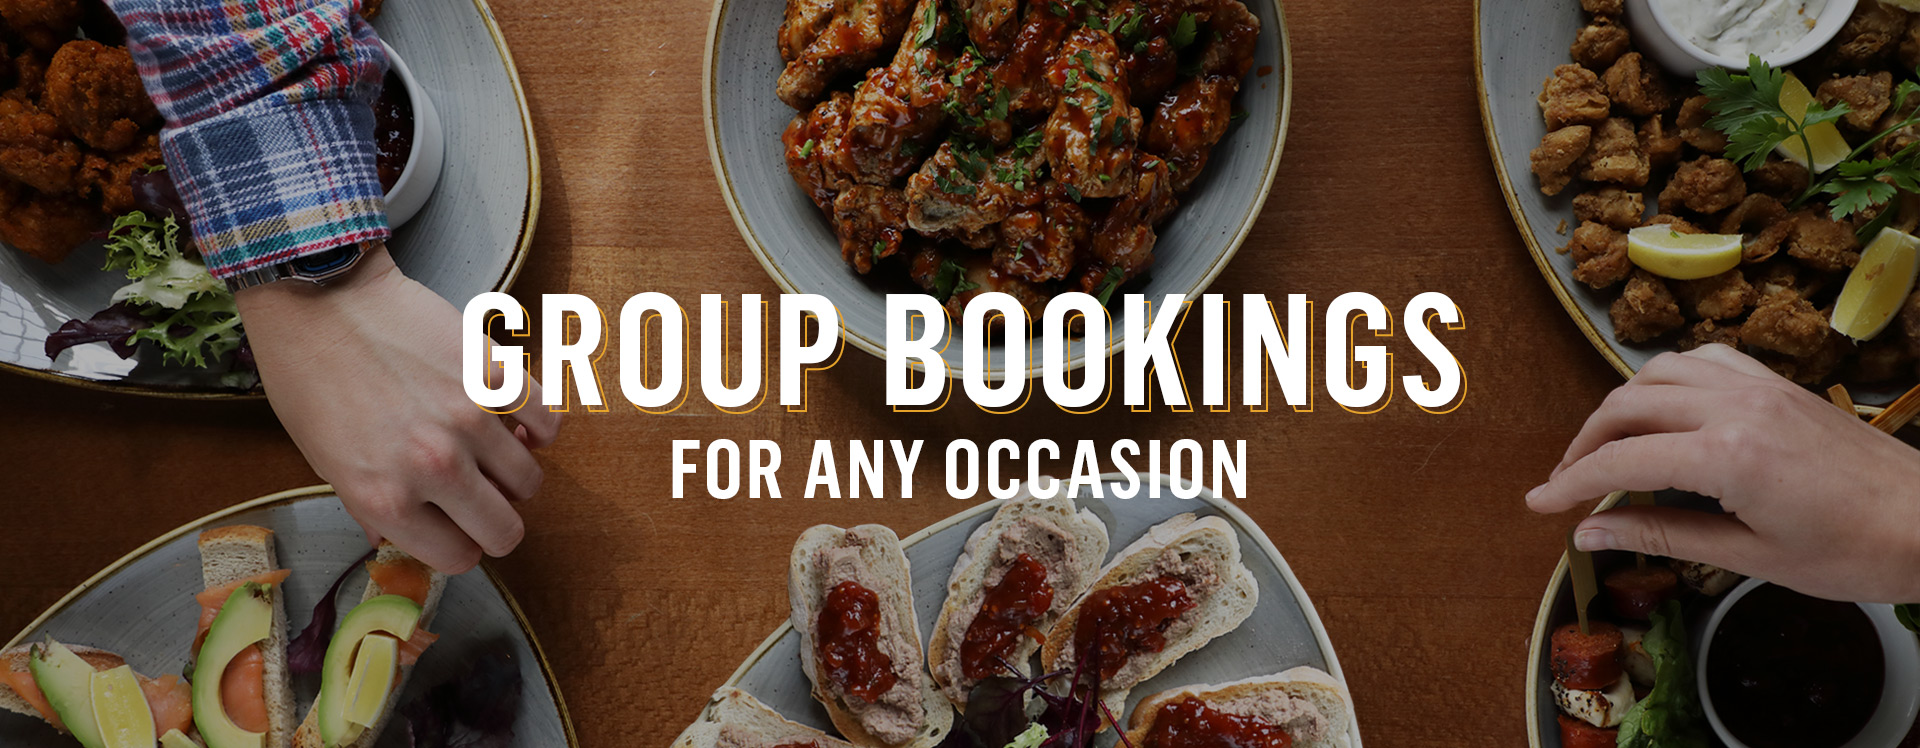 Group Bookings at The Magpie